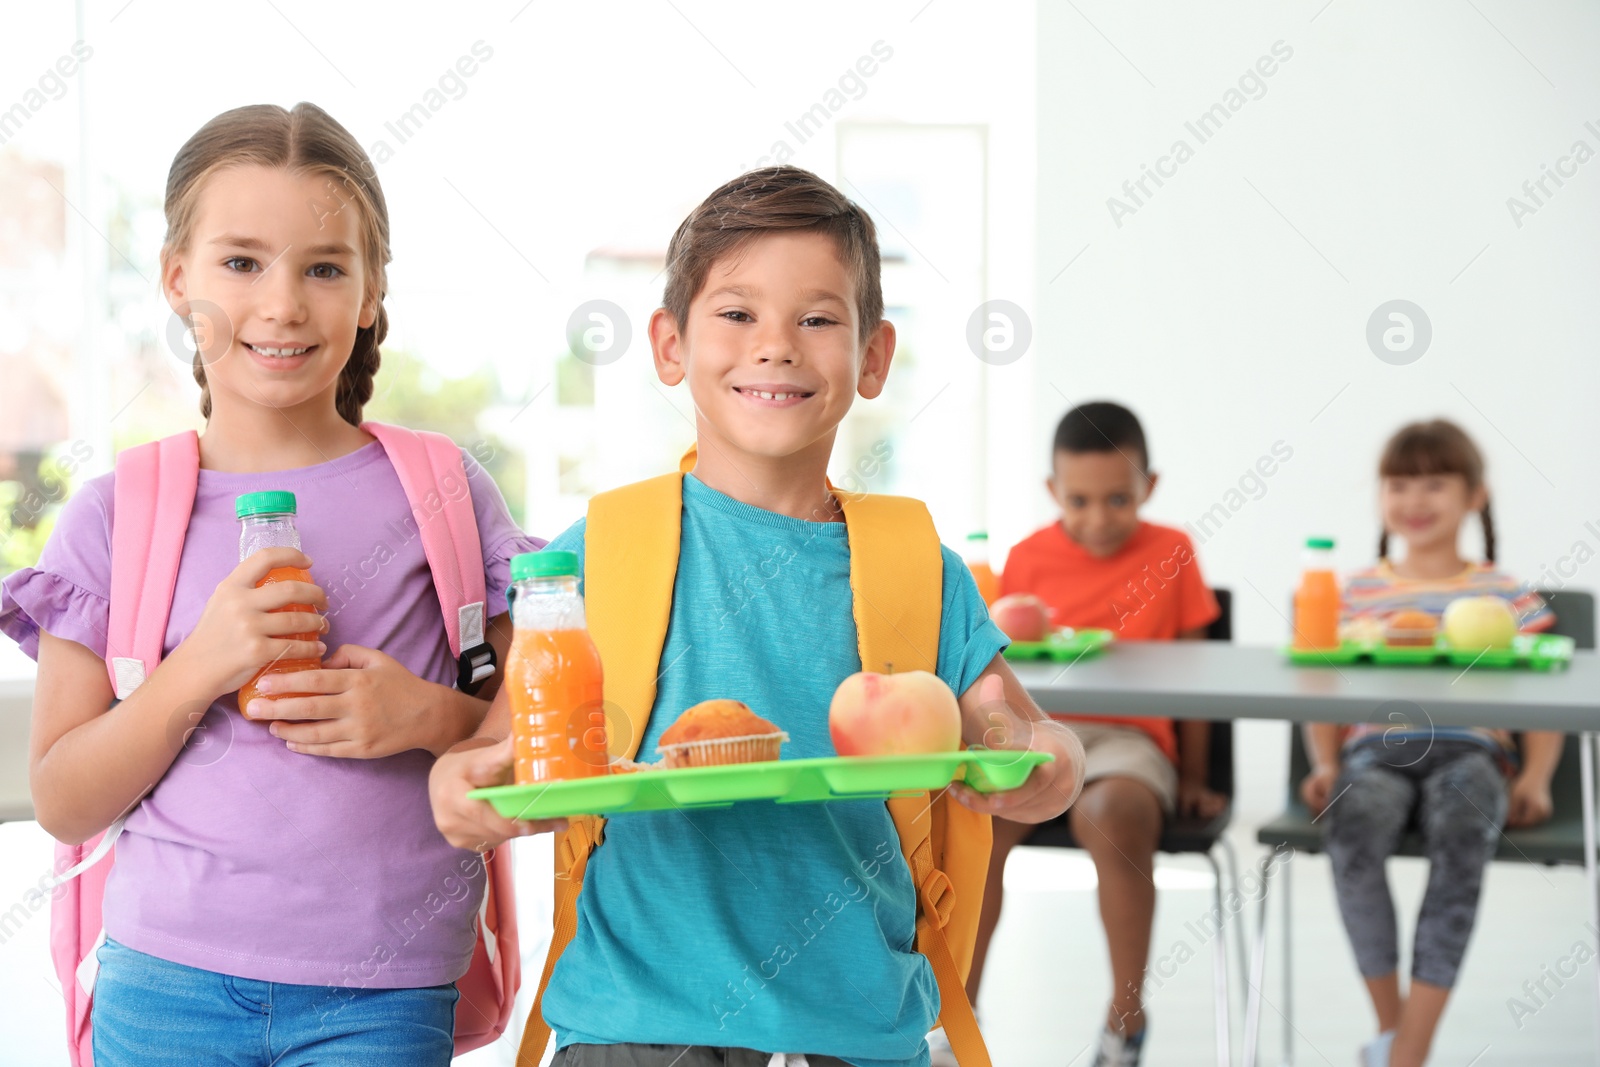 Photo of Children with healthy food at school canteen